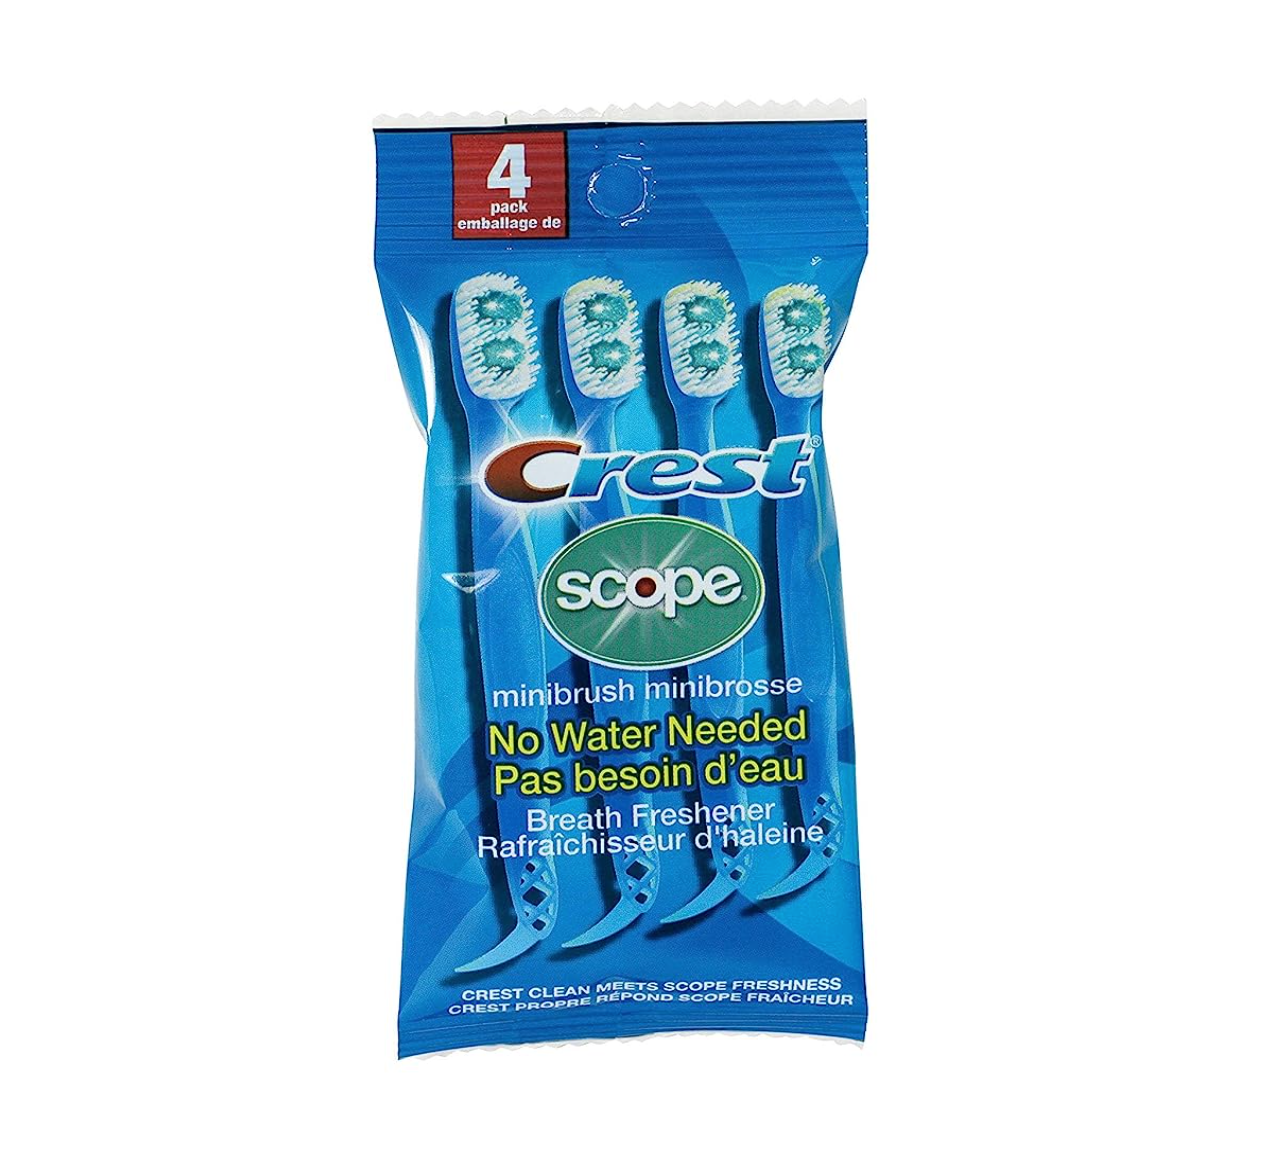 Crest Scope | Mini Brushes-Disposable Toothbrushes with Toothpaste and Pick For Work or Travel (4 count, 6 pack (24 brushes))